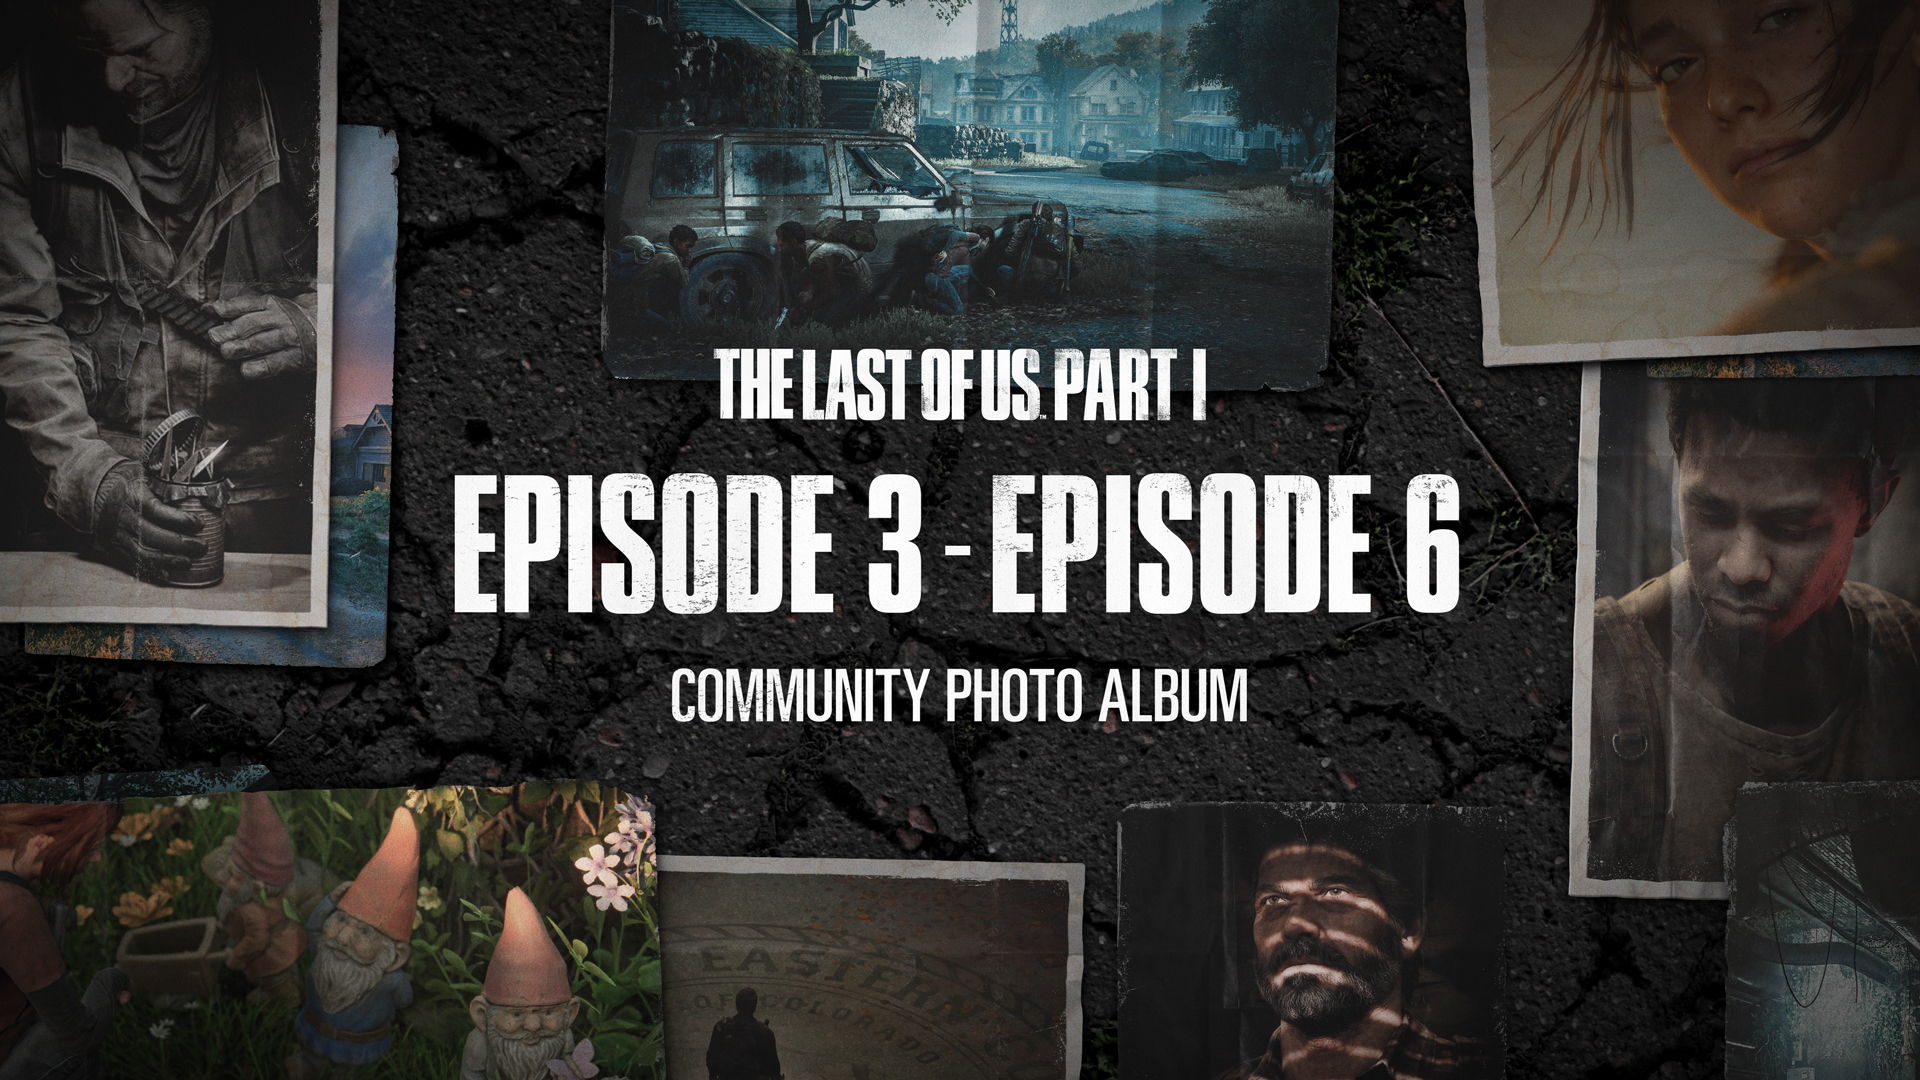 Episode 6 of The Last of Us is coming Saturday. Check out what we